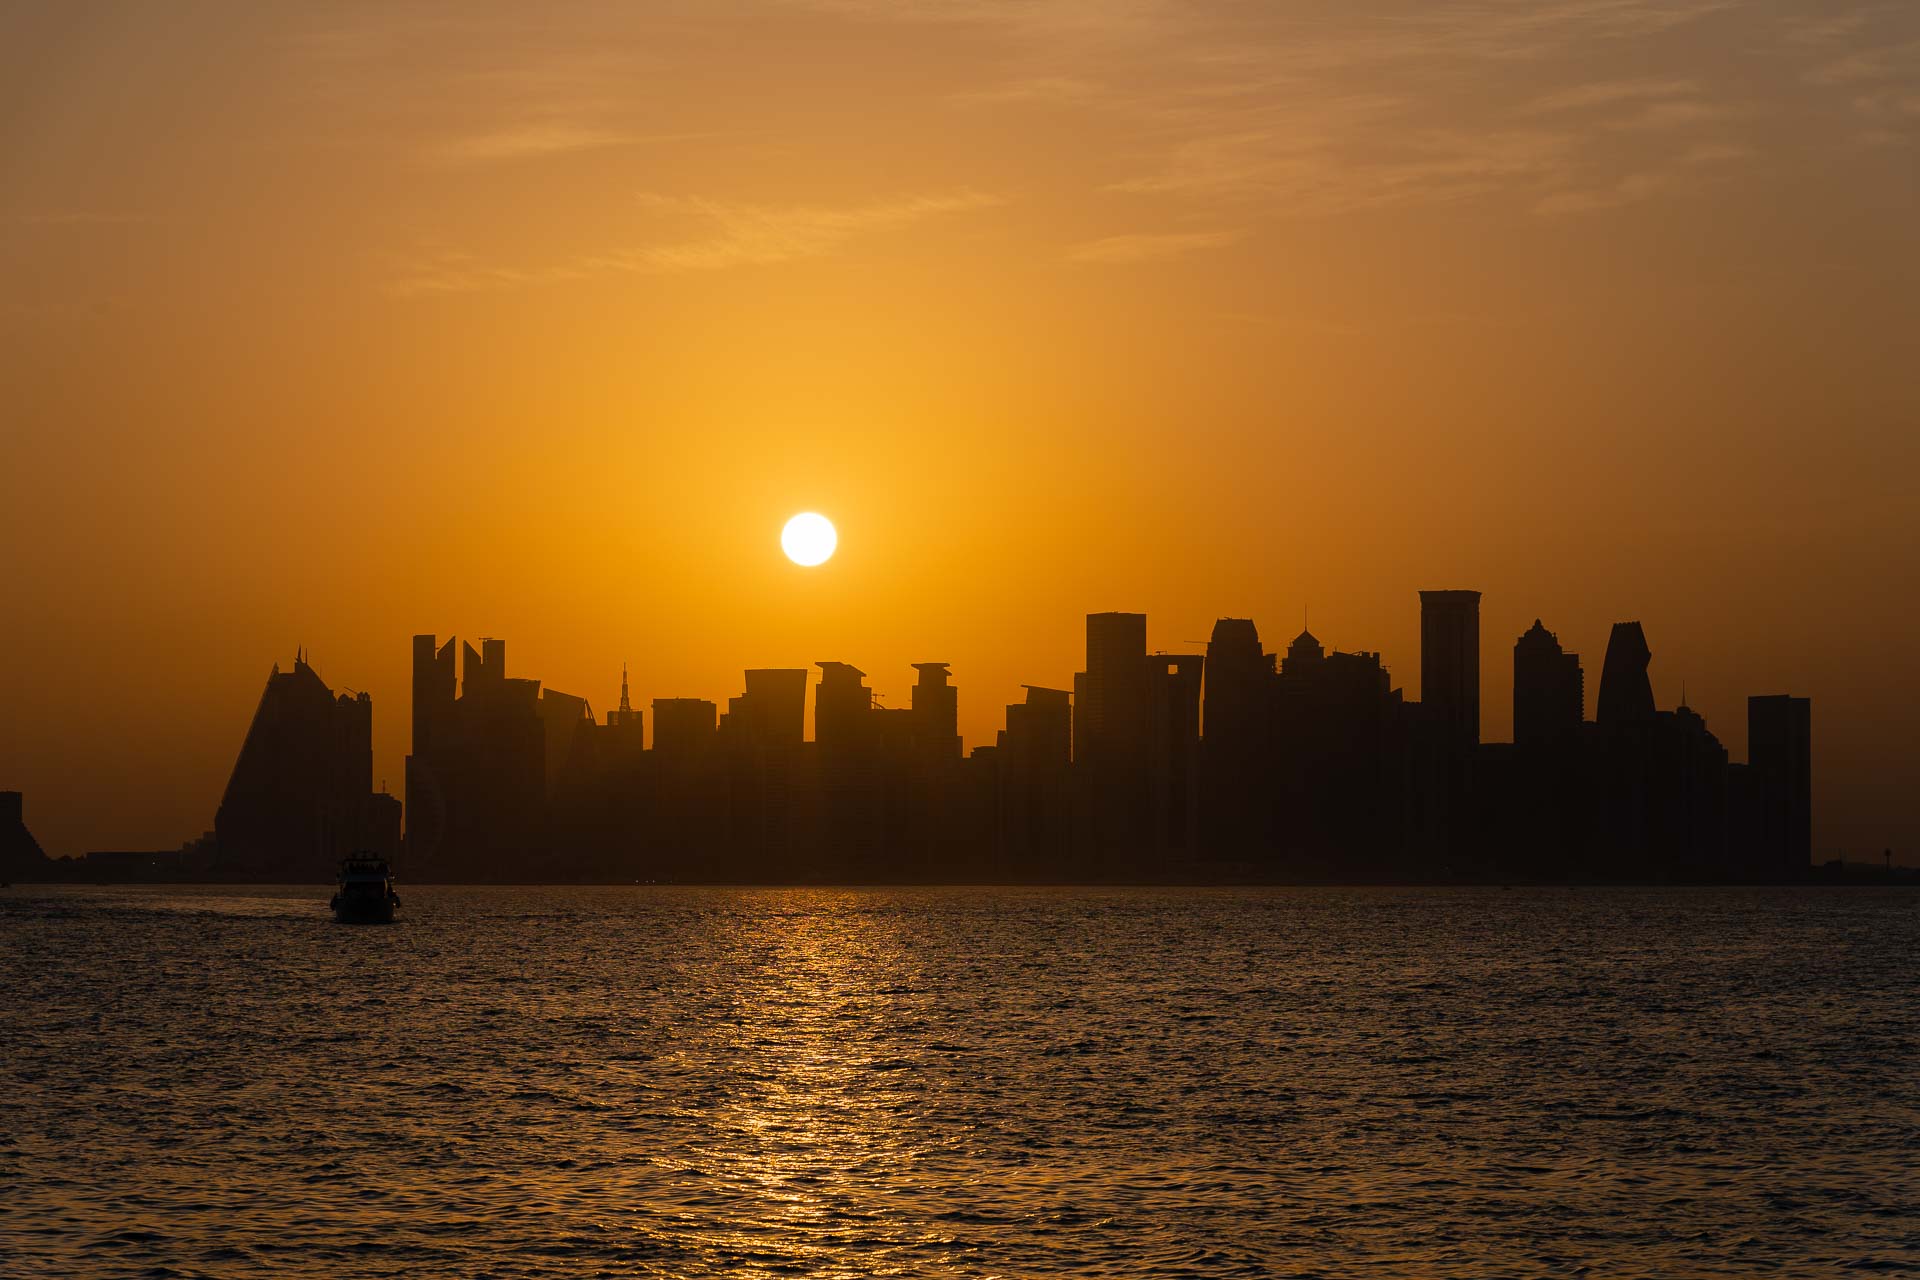 View of the city of Doha seen from the boat during the sunset